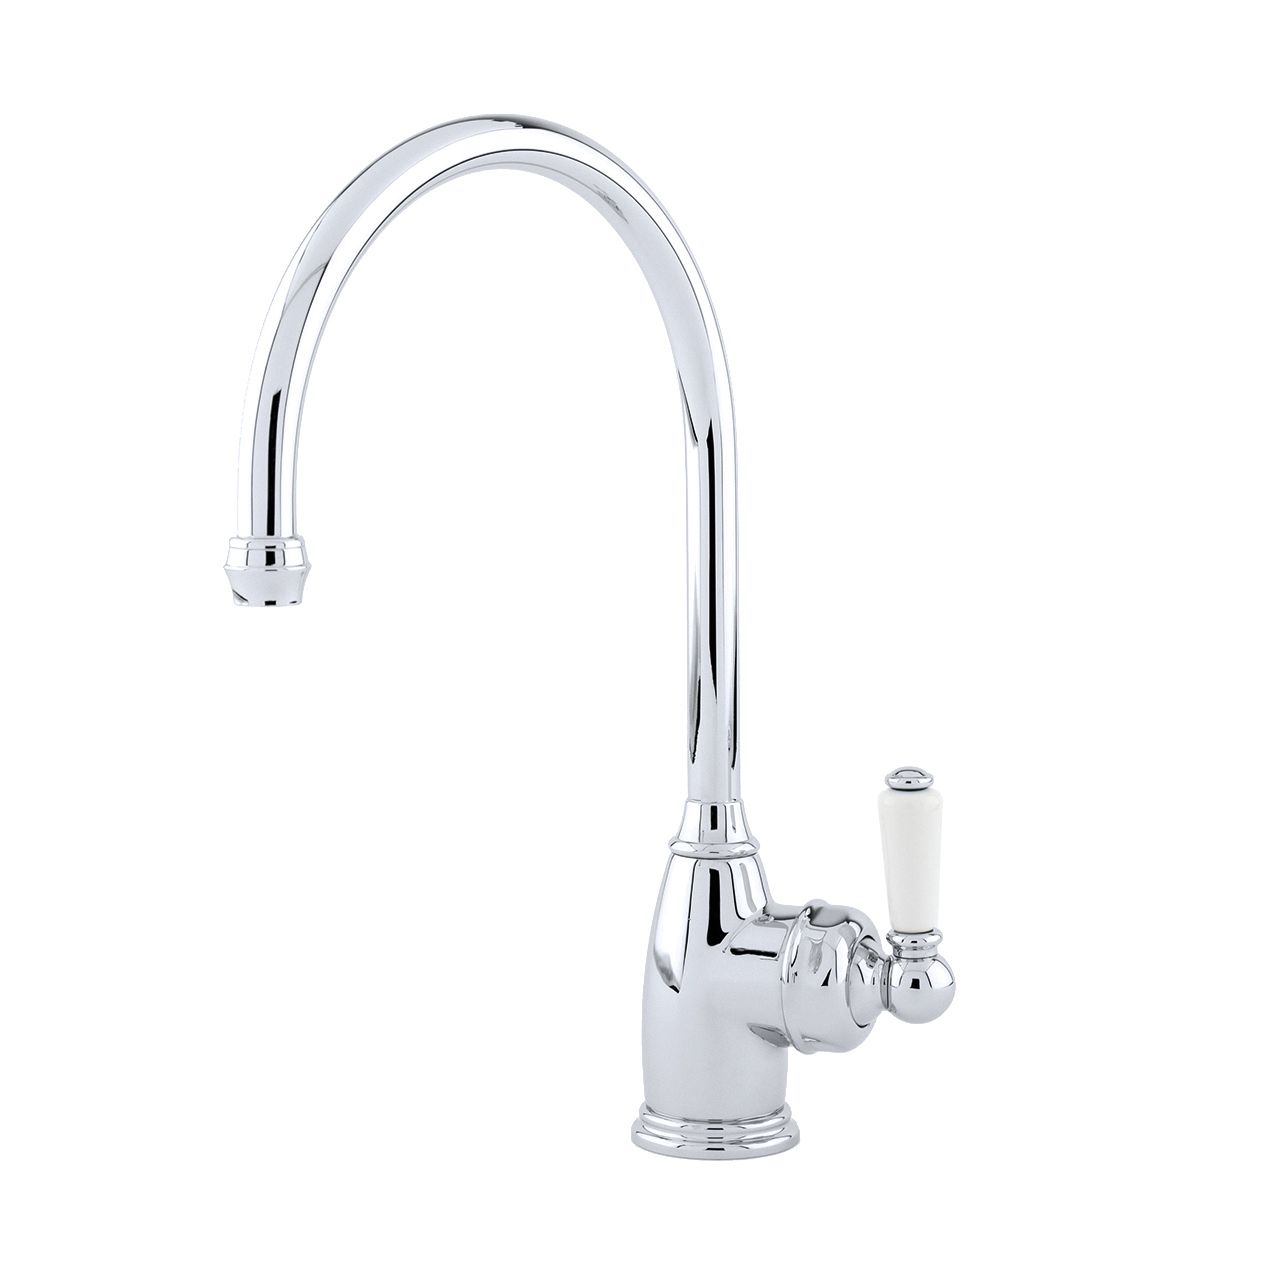 Phoenician Monobloc Sink Mixer Tap with single lever – Perrin & Rowe